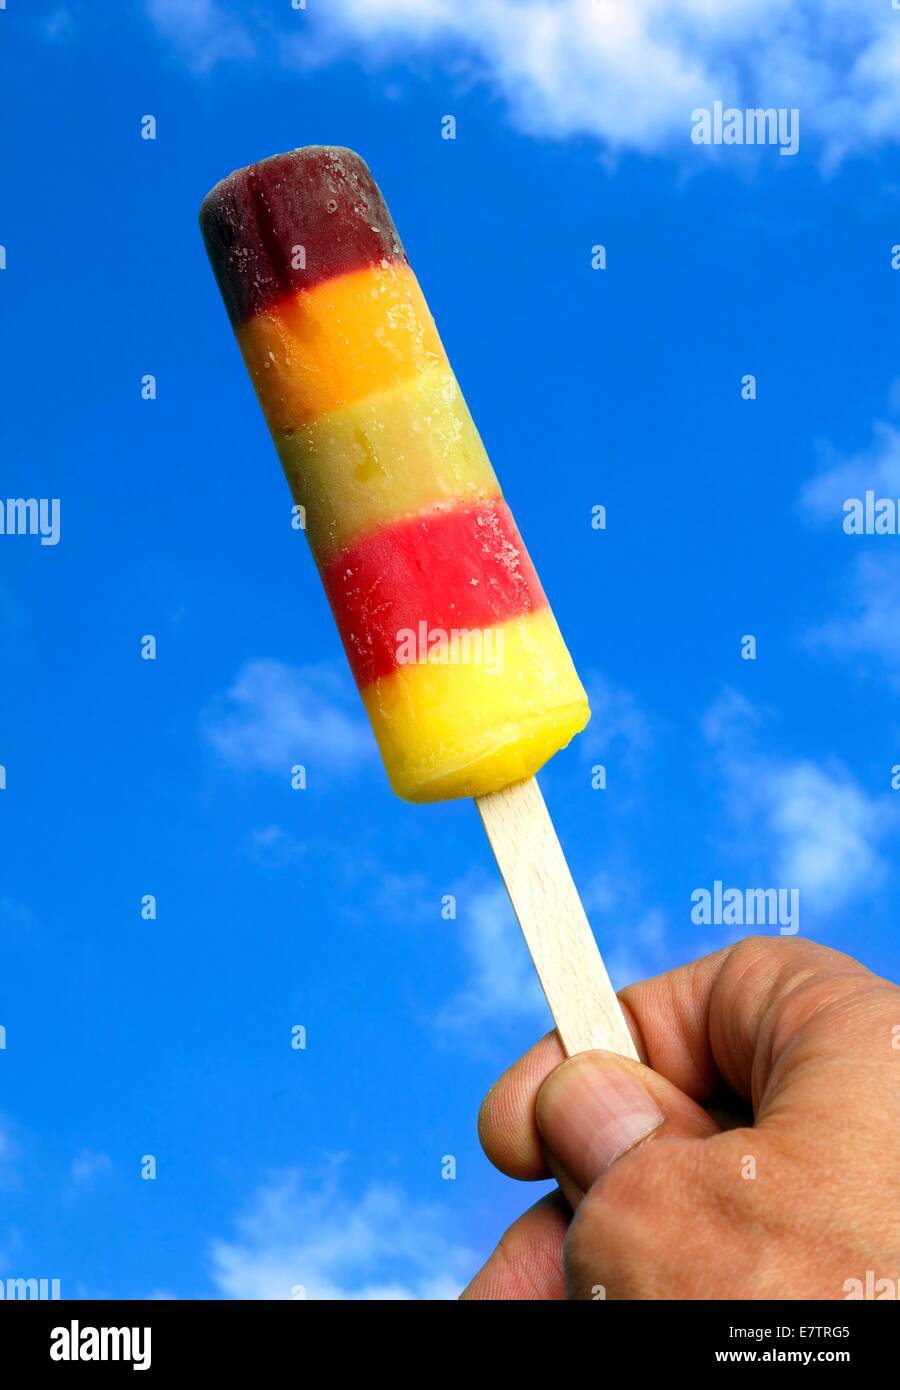 Person holding ice lolly. Stock Photo